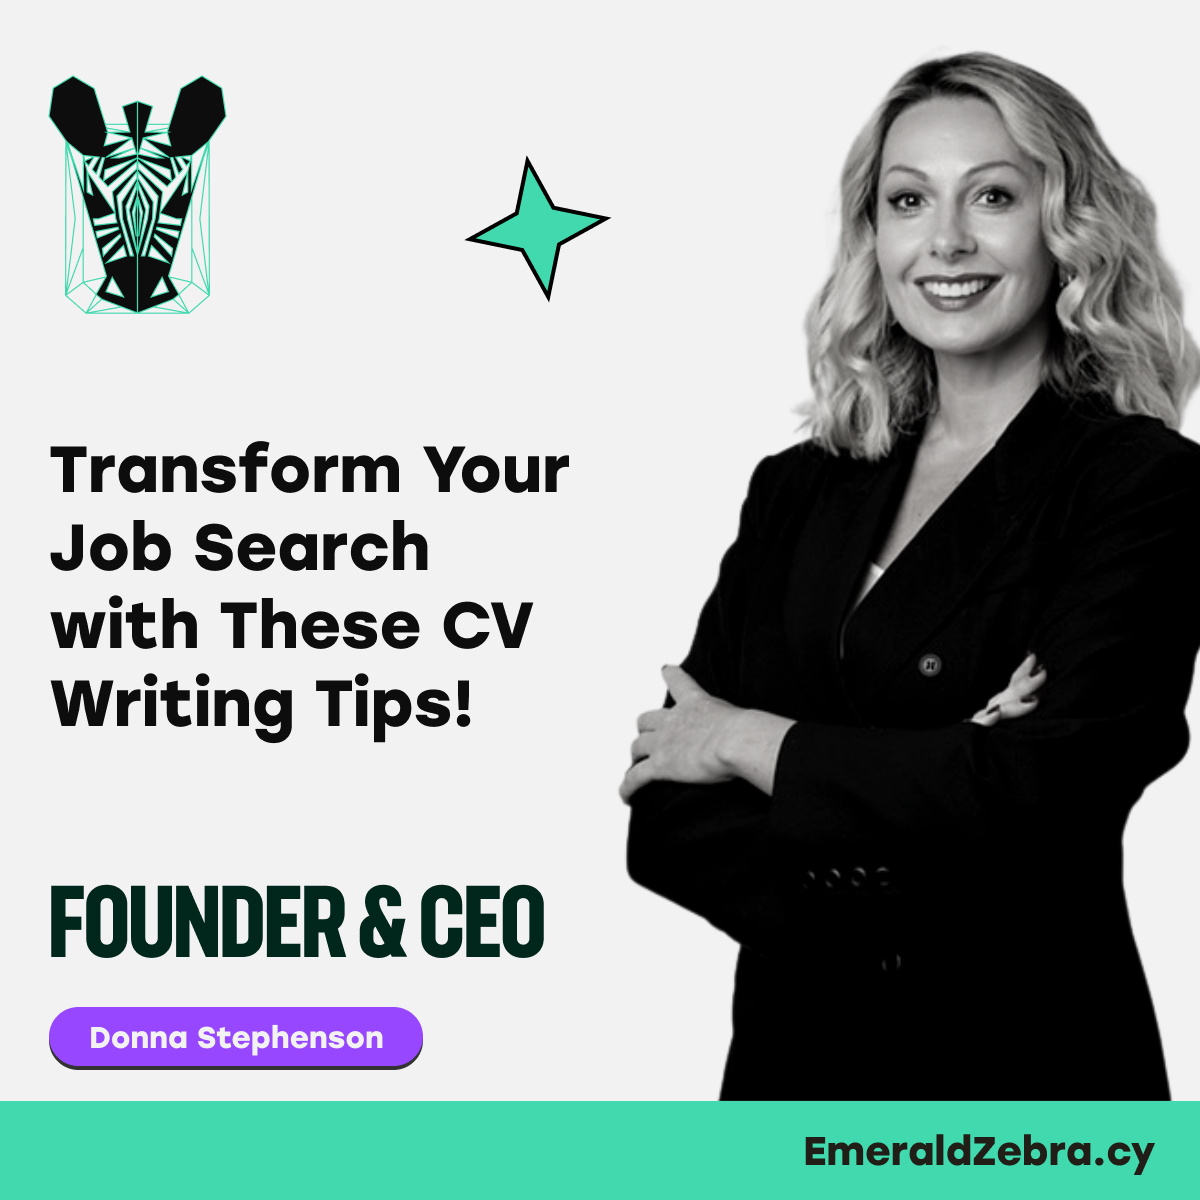 Transform Your Job Search with These CV Writing Tips